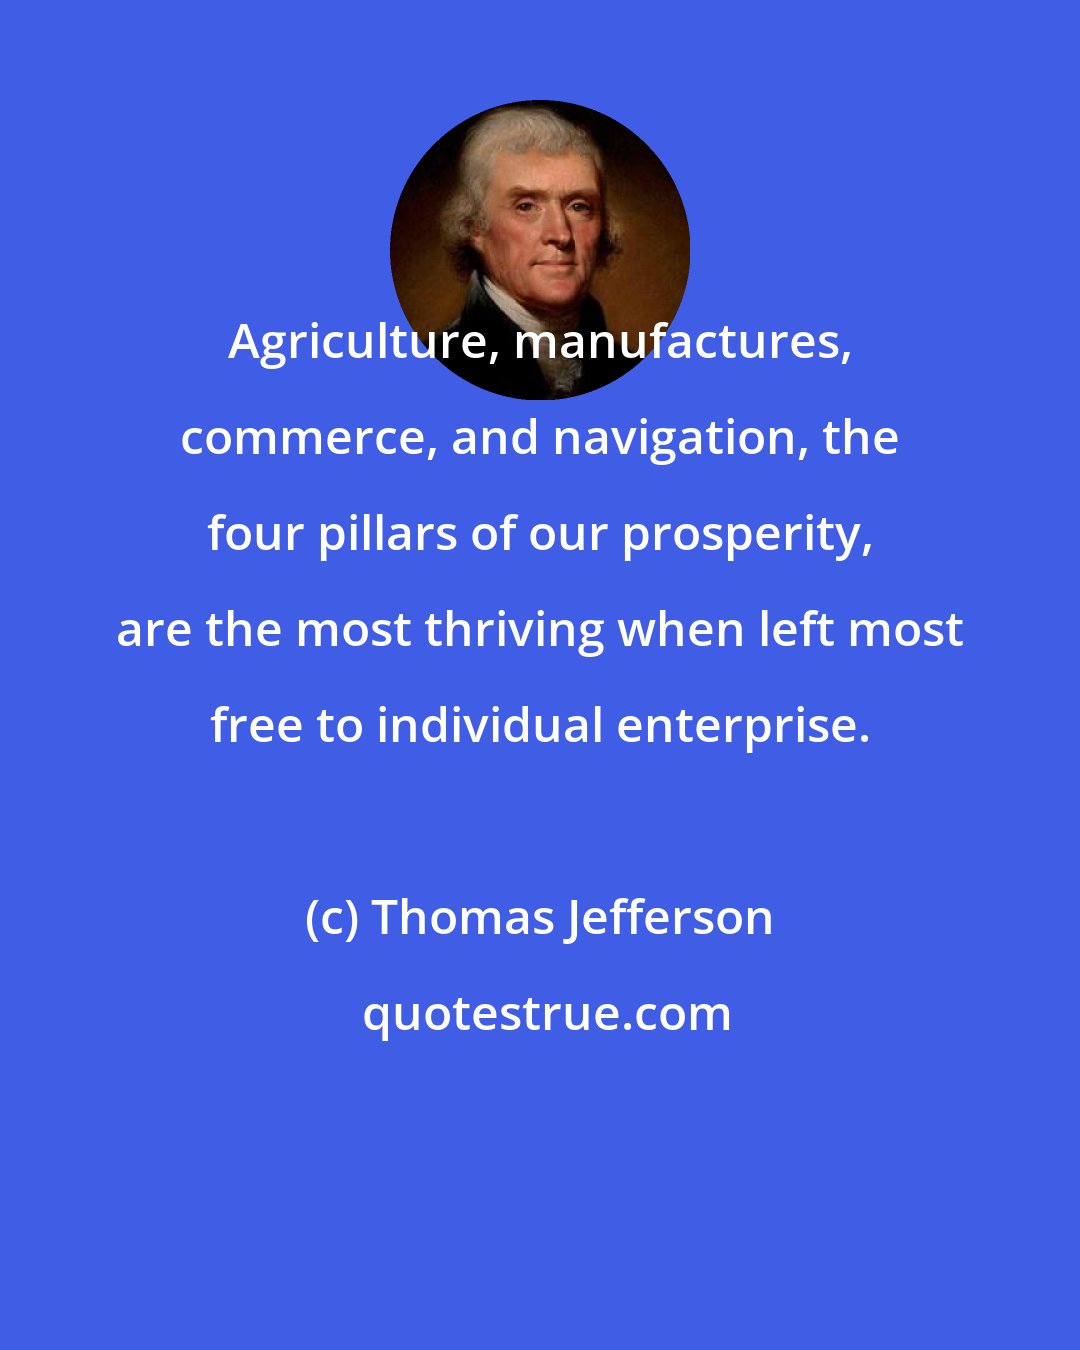 Thomas Jefferson: Agriculture, manufactures, commerce, and navigation, the four pillars of our prosperity, are the most thriving when left most free to individual enterprise.